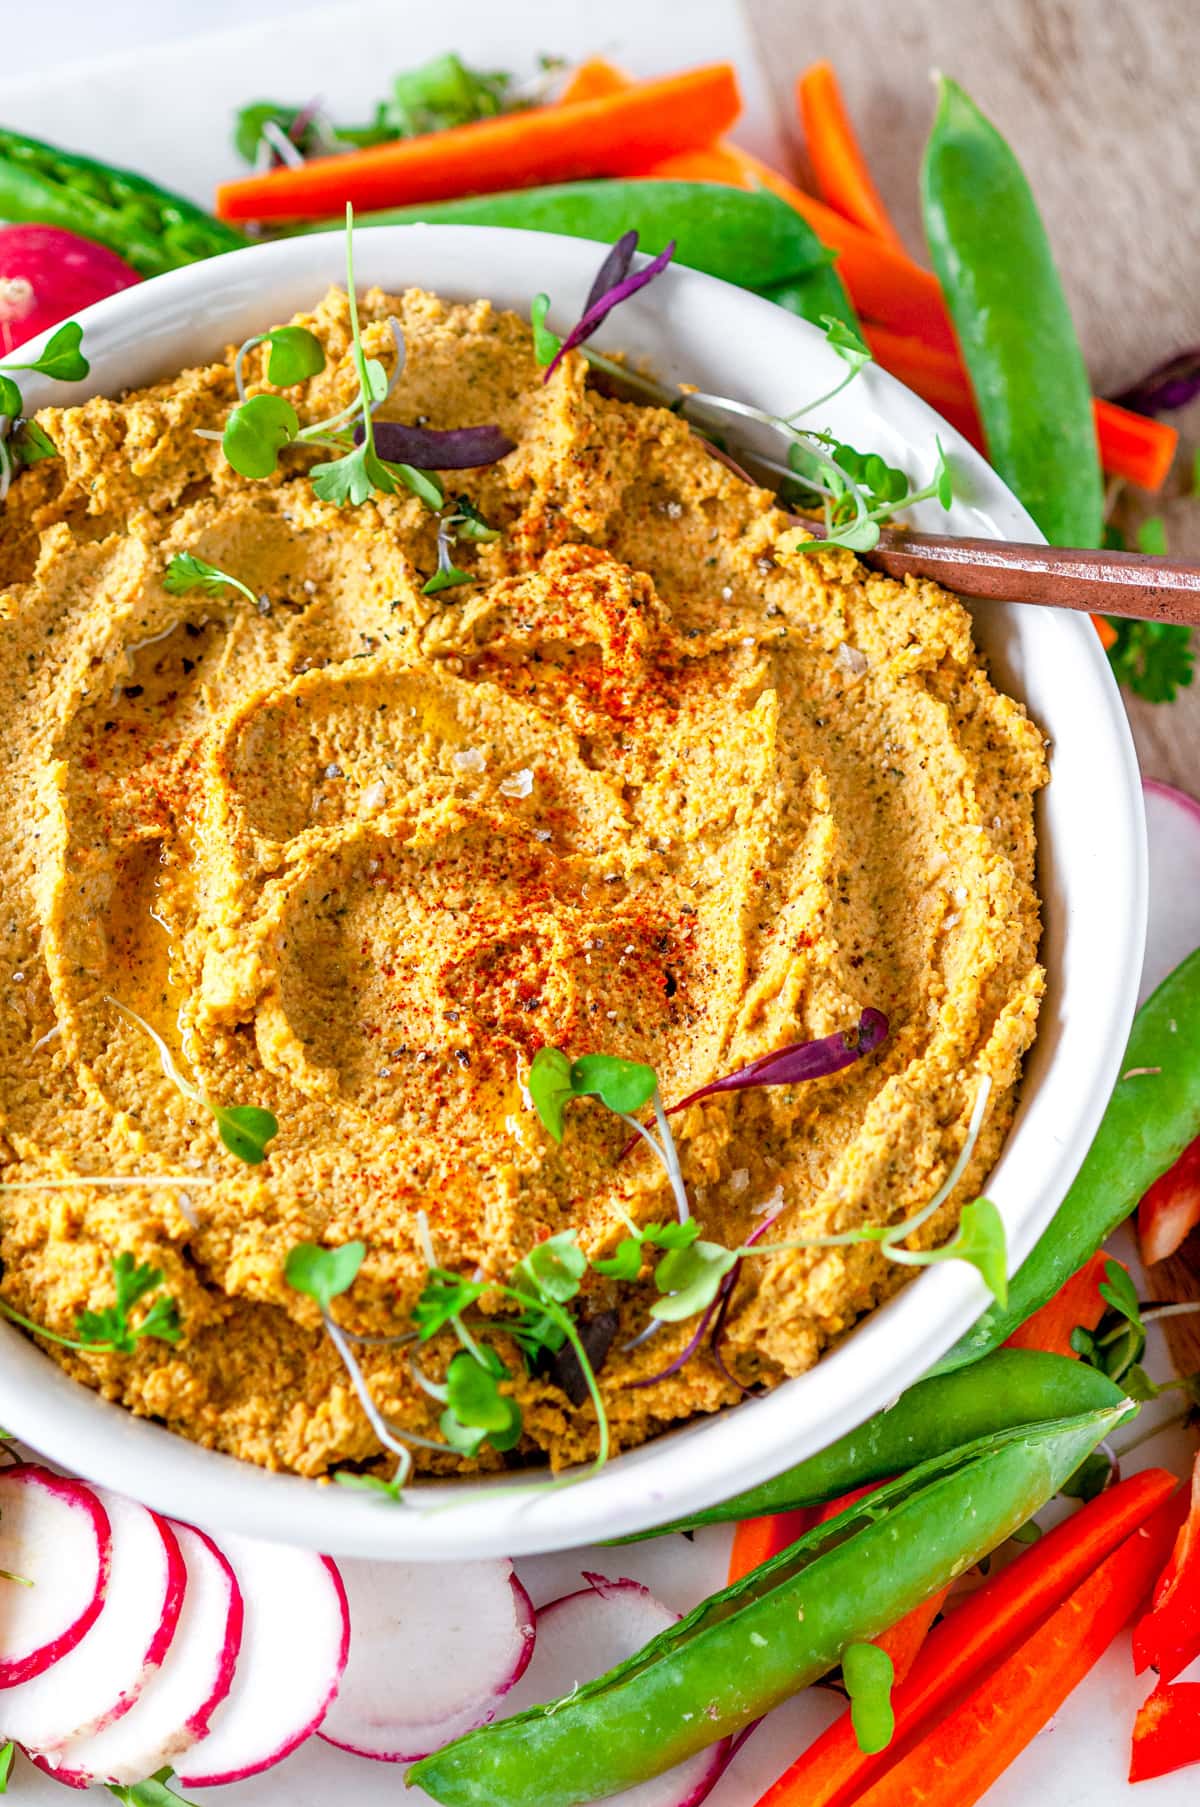 Easy Roasted Vegetable Hummus in white bowl topped with microgreens and surrounded by fresh veggies on white marble close up overhead view